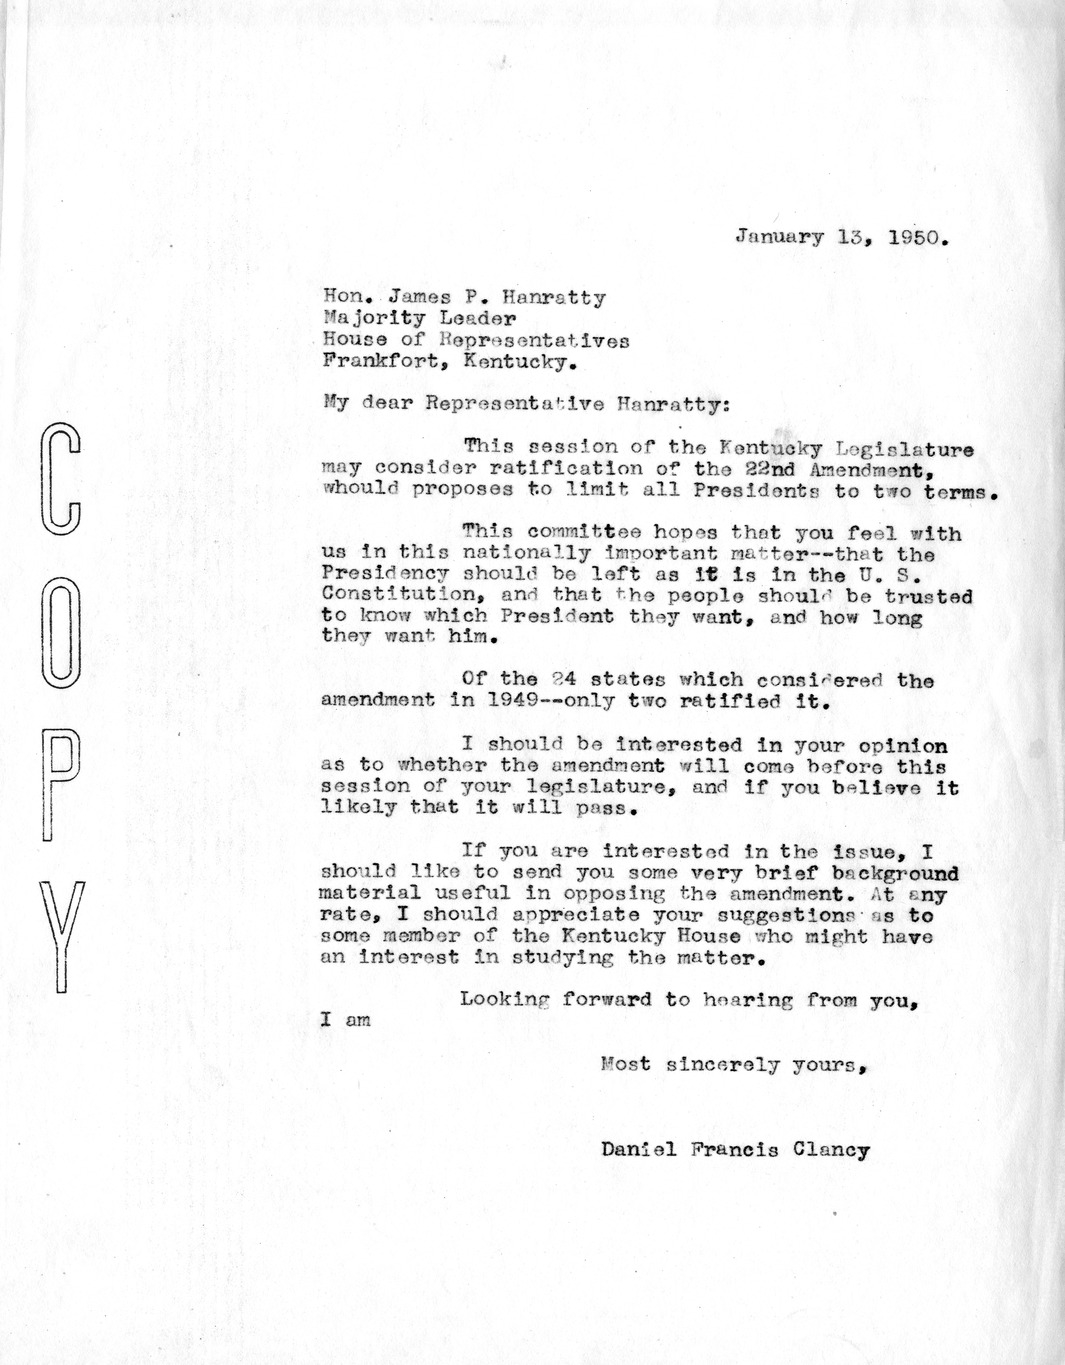 Letter from Daniel F. Clancy to James P. Hanratty